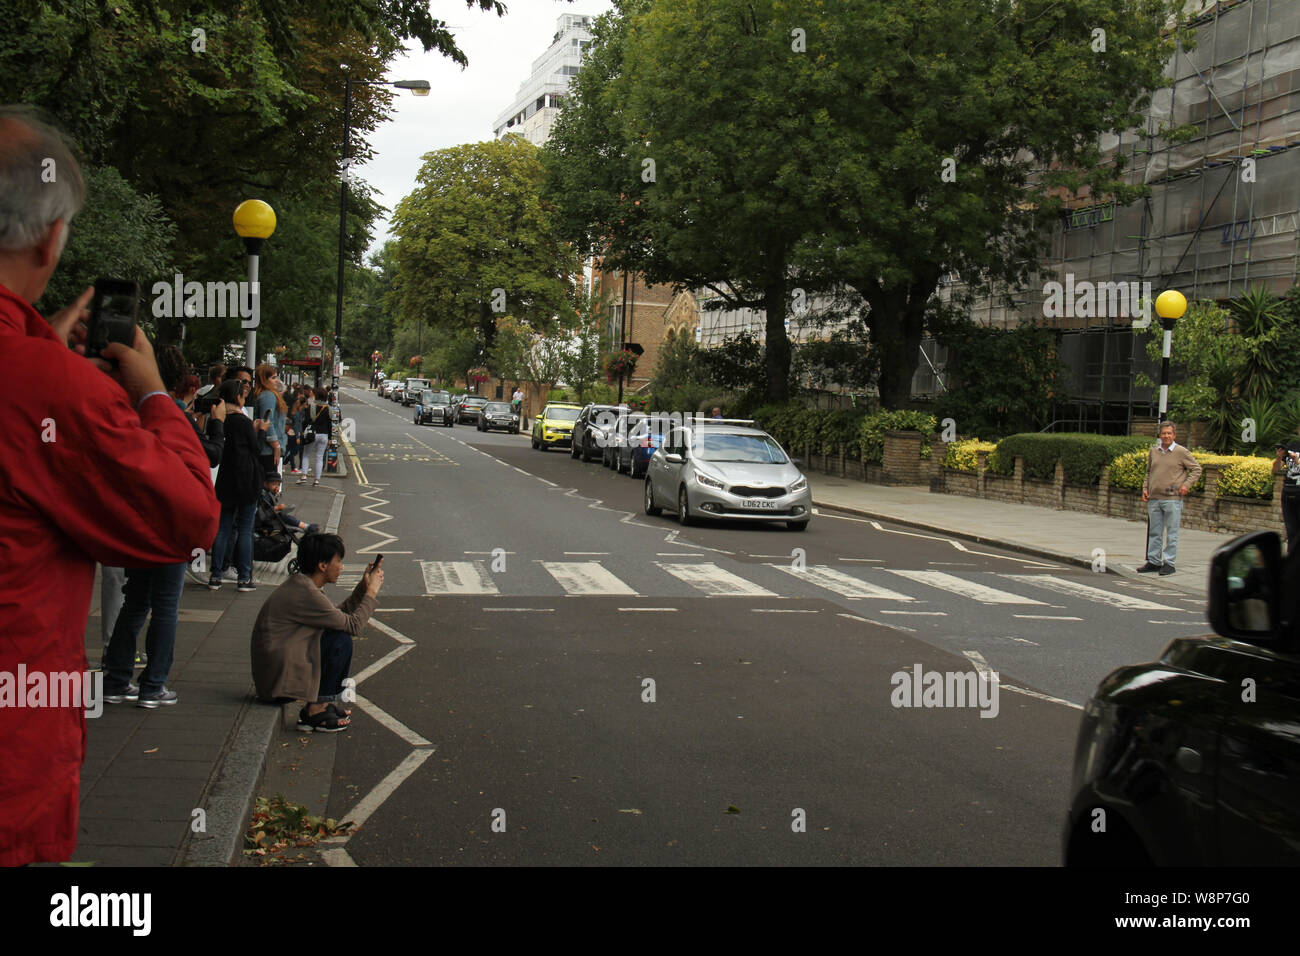 London, UK - 10 August 2019: Beatles fans seen by the Abbey Road NW8 zebra crossing on the weekend after the 50th anniversary of the Beatles penultimate album cover. On August 8, 1969 the four Beatles walked out of No. 3 Abbey Road after finishing recording for a 15-minute photos shoot by photographer Iain Macmillan. Credit: David Mbiyu/Alamy Live News Stock Photo